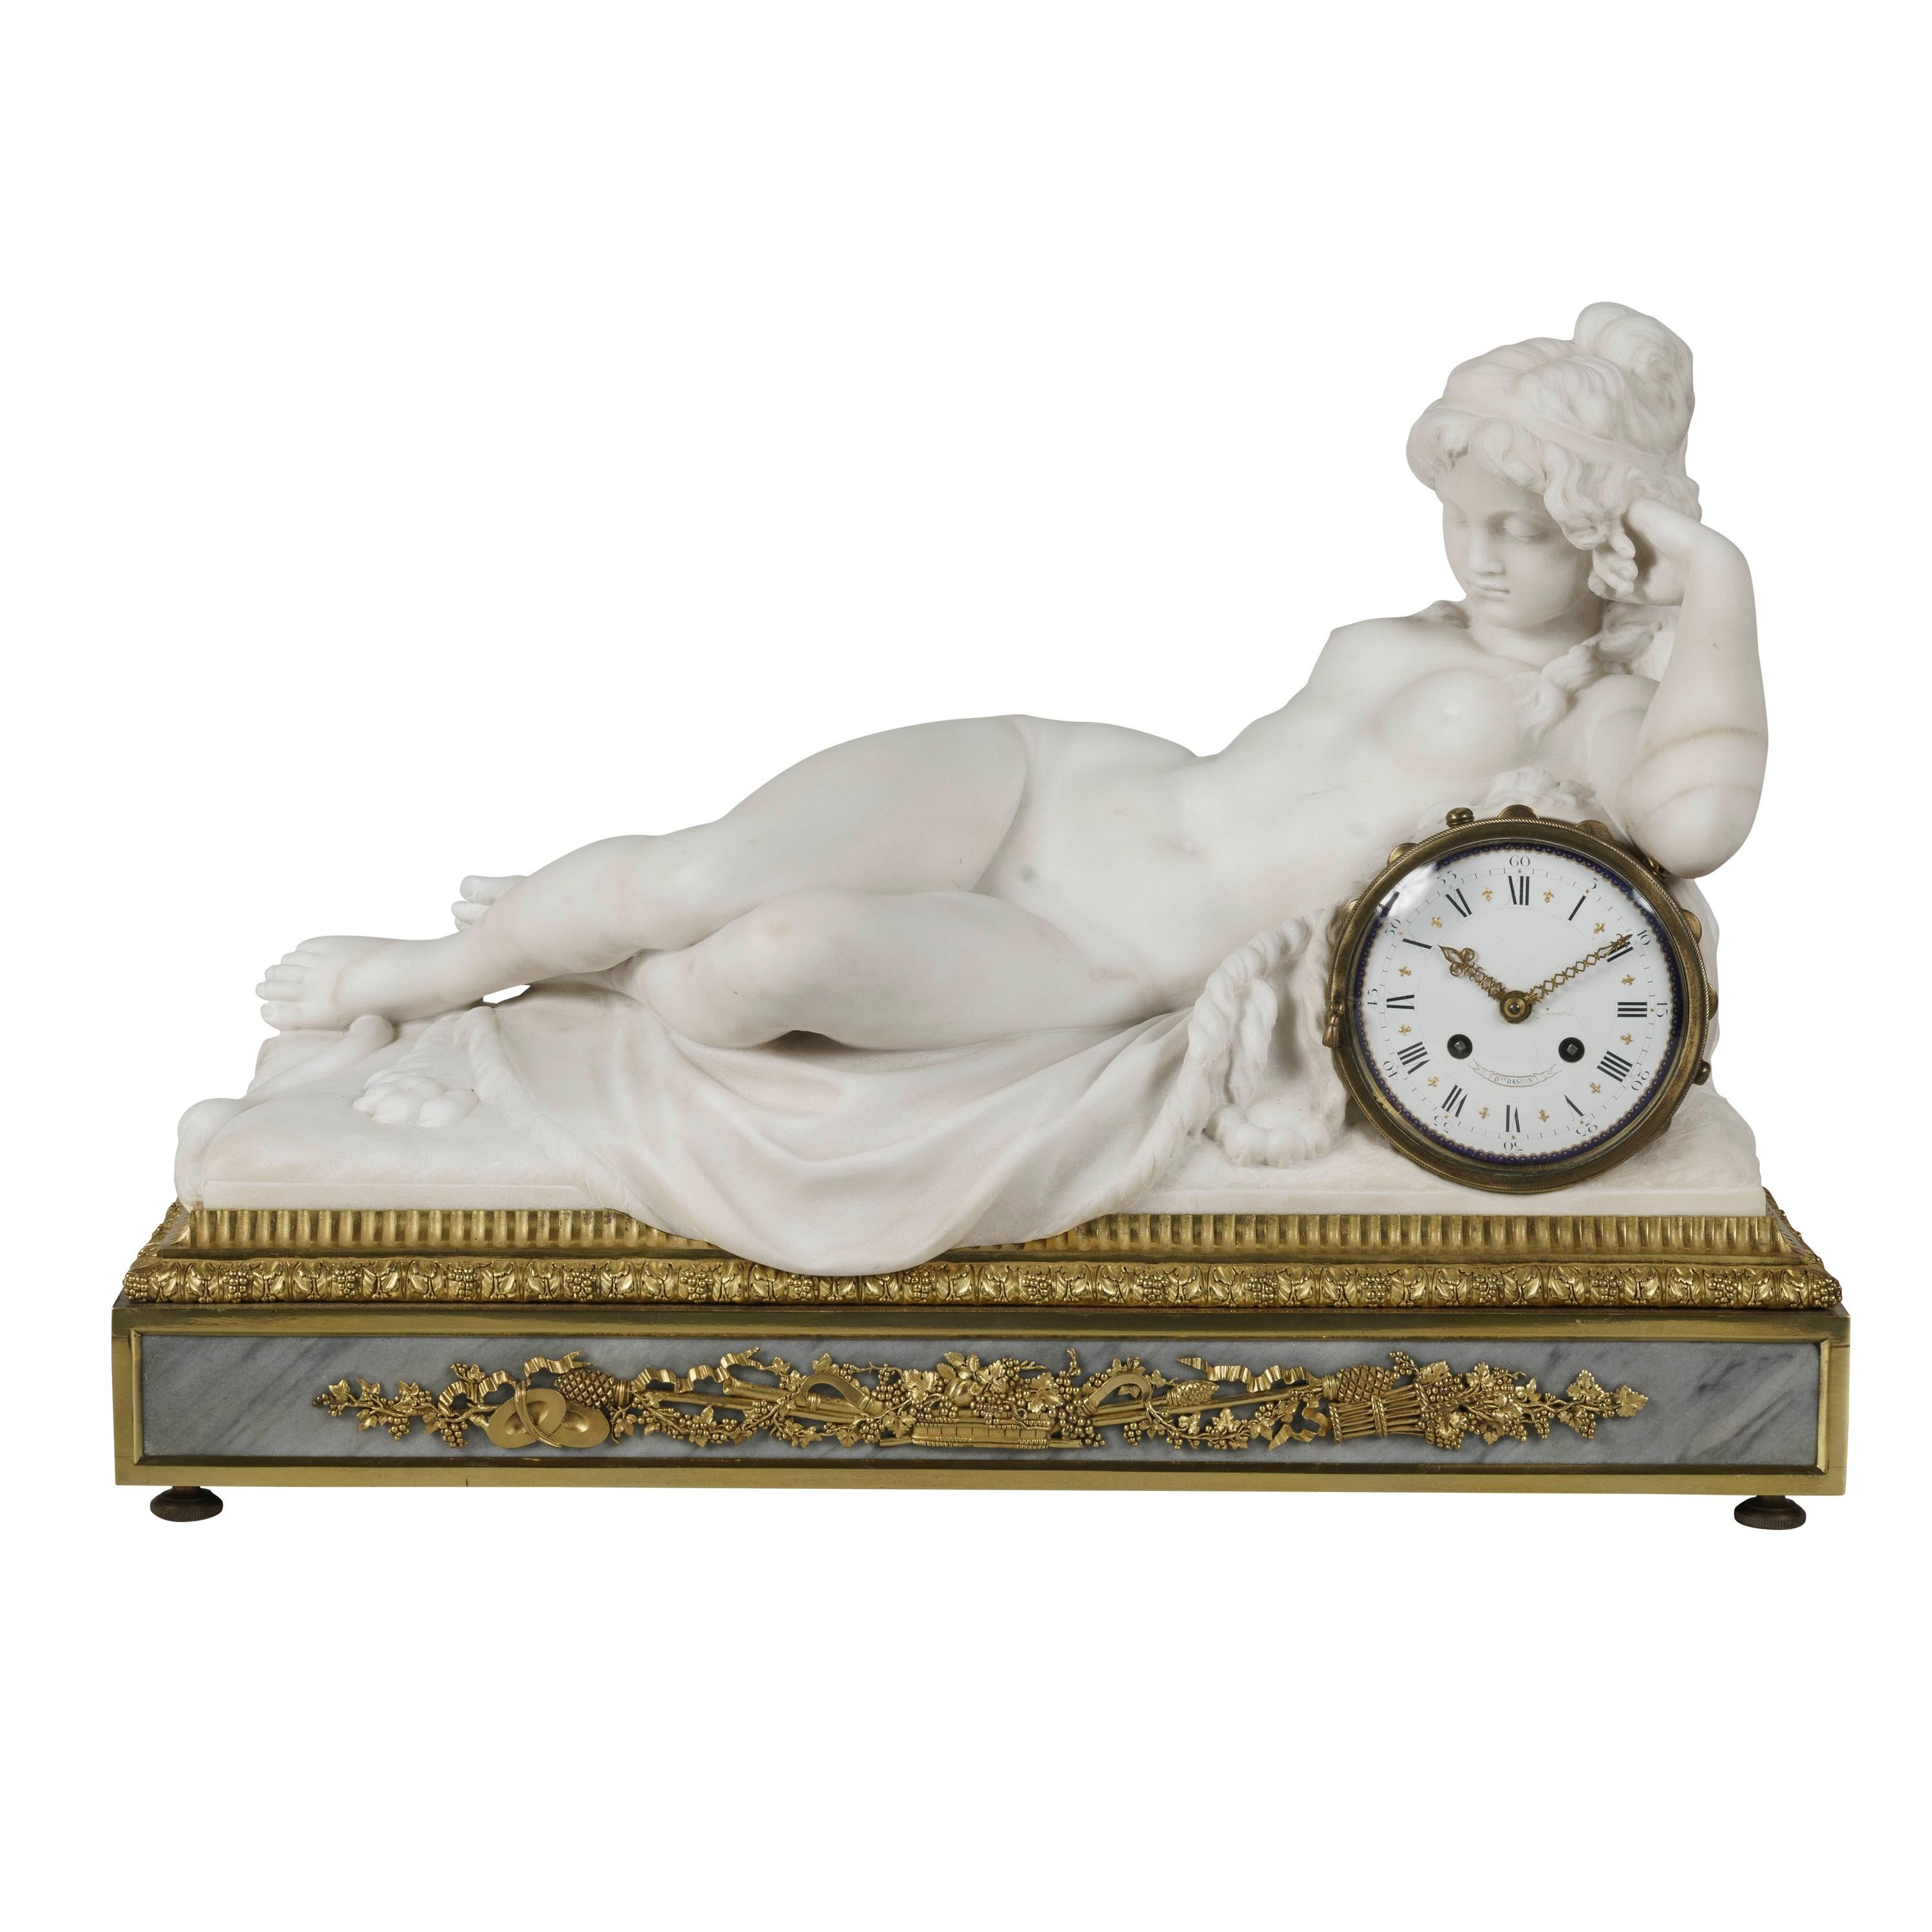 Carved Marble Mantel Clock by Henry Dasson, Dated 1880